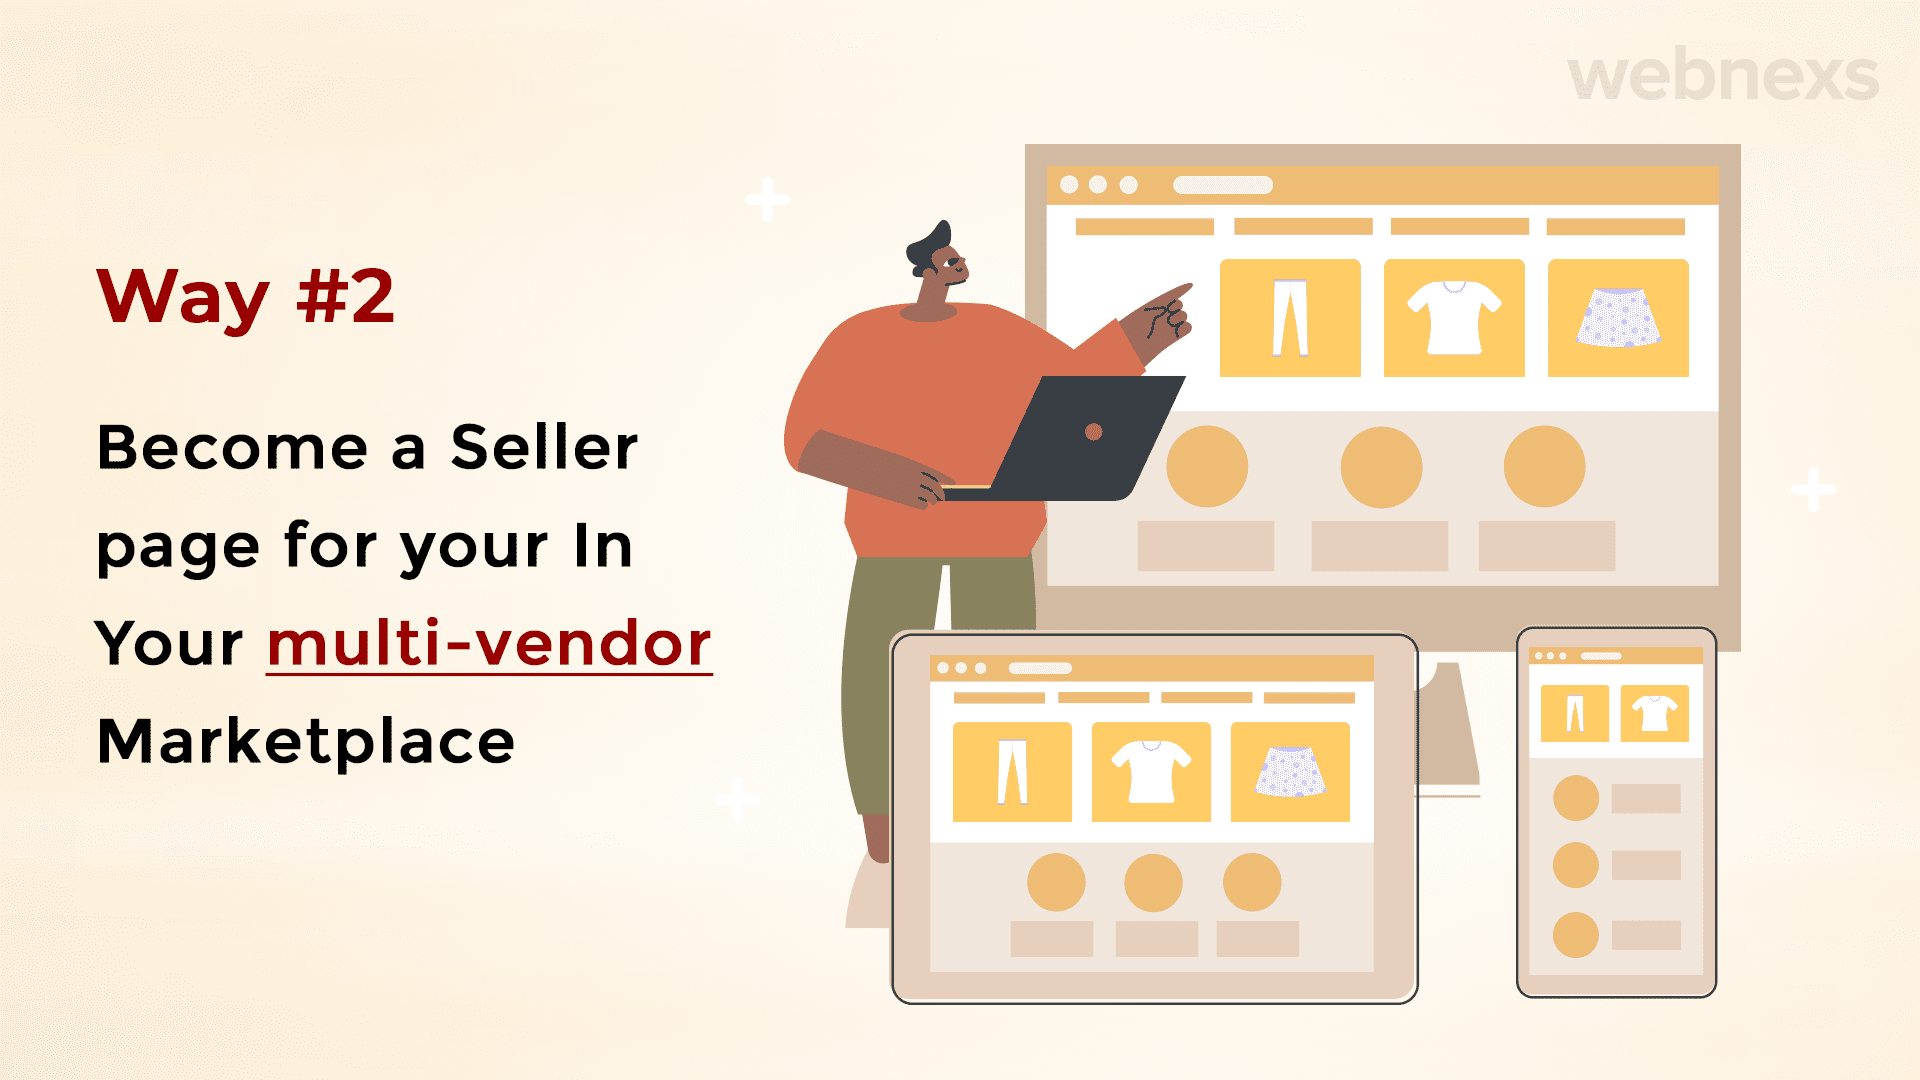 Way #2 “Become a Seller” page for your In Your multivendor ecommerce Marketplace Webnexs